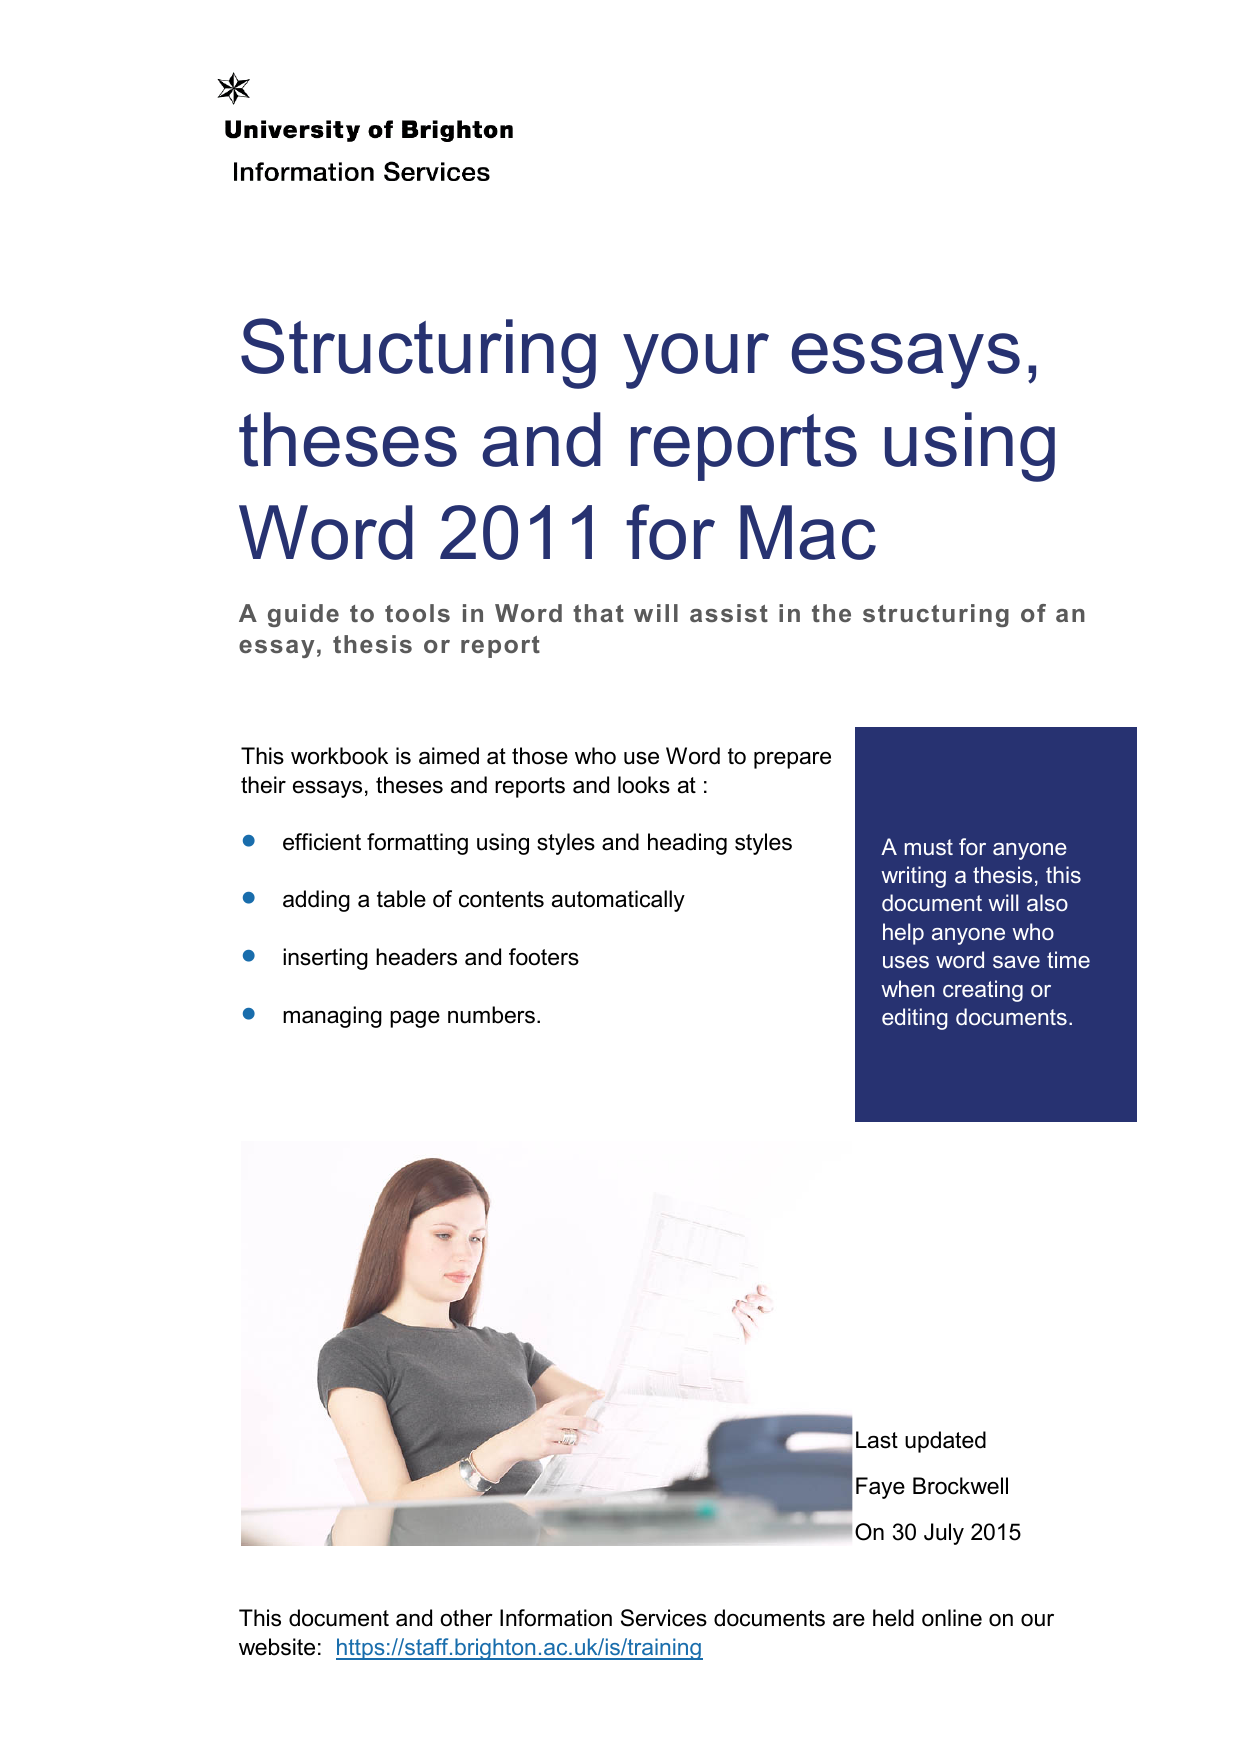 how much is the upgrade word for mac 2011